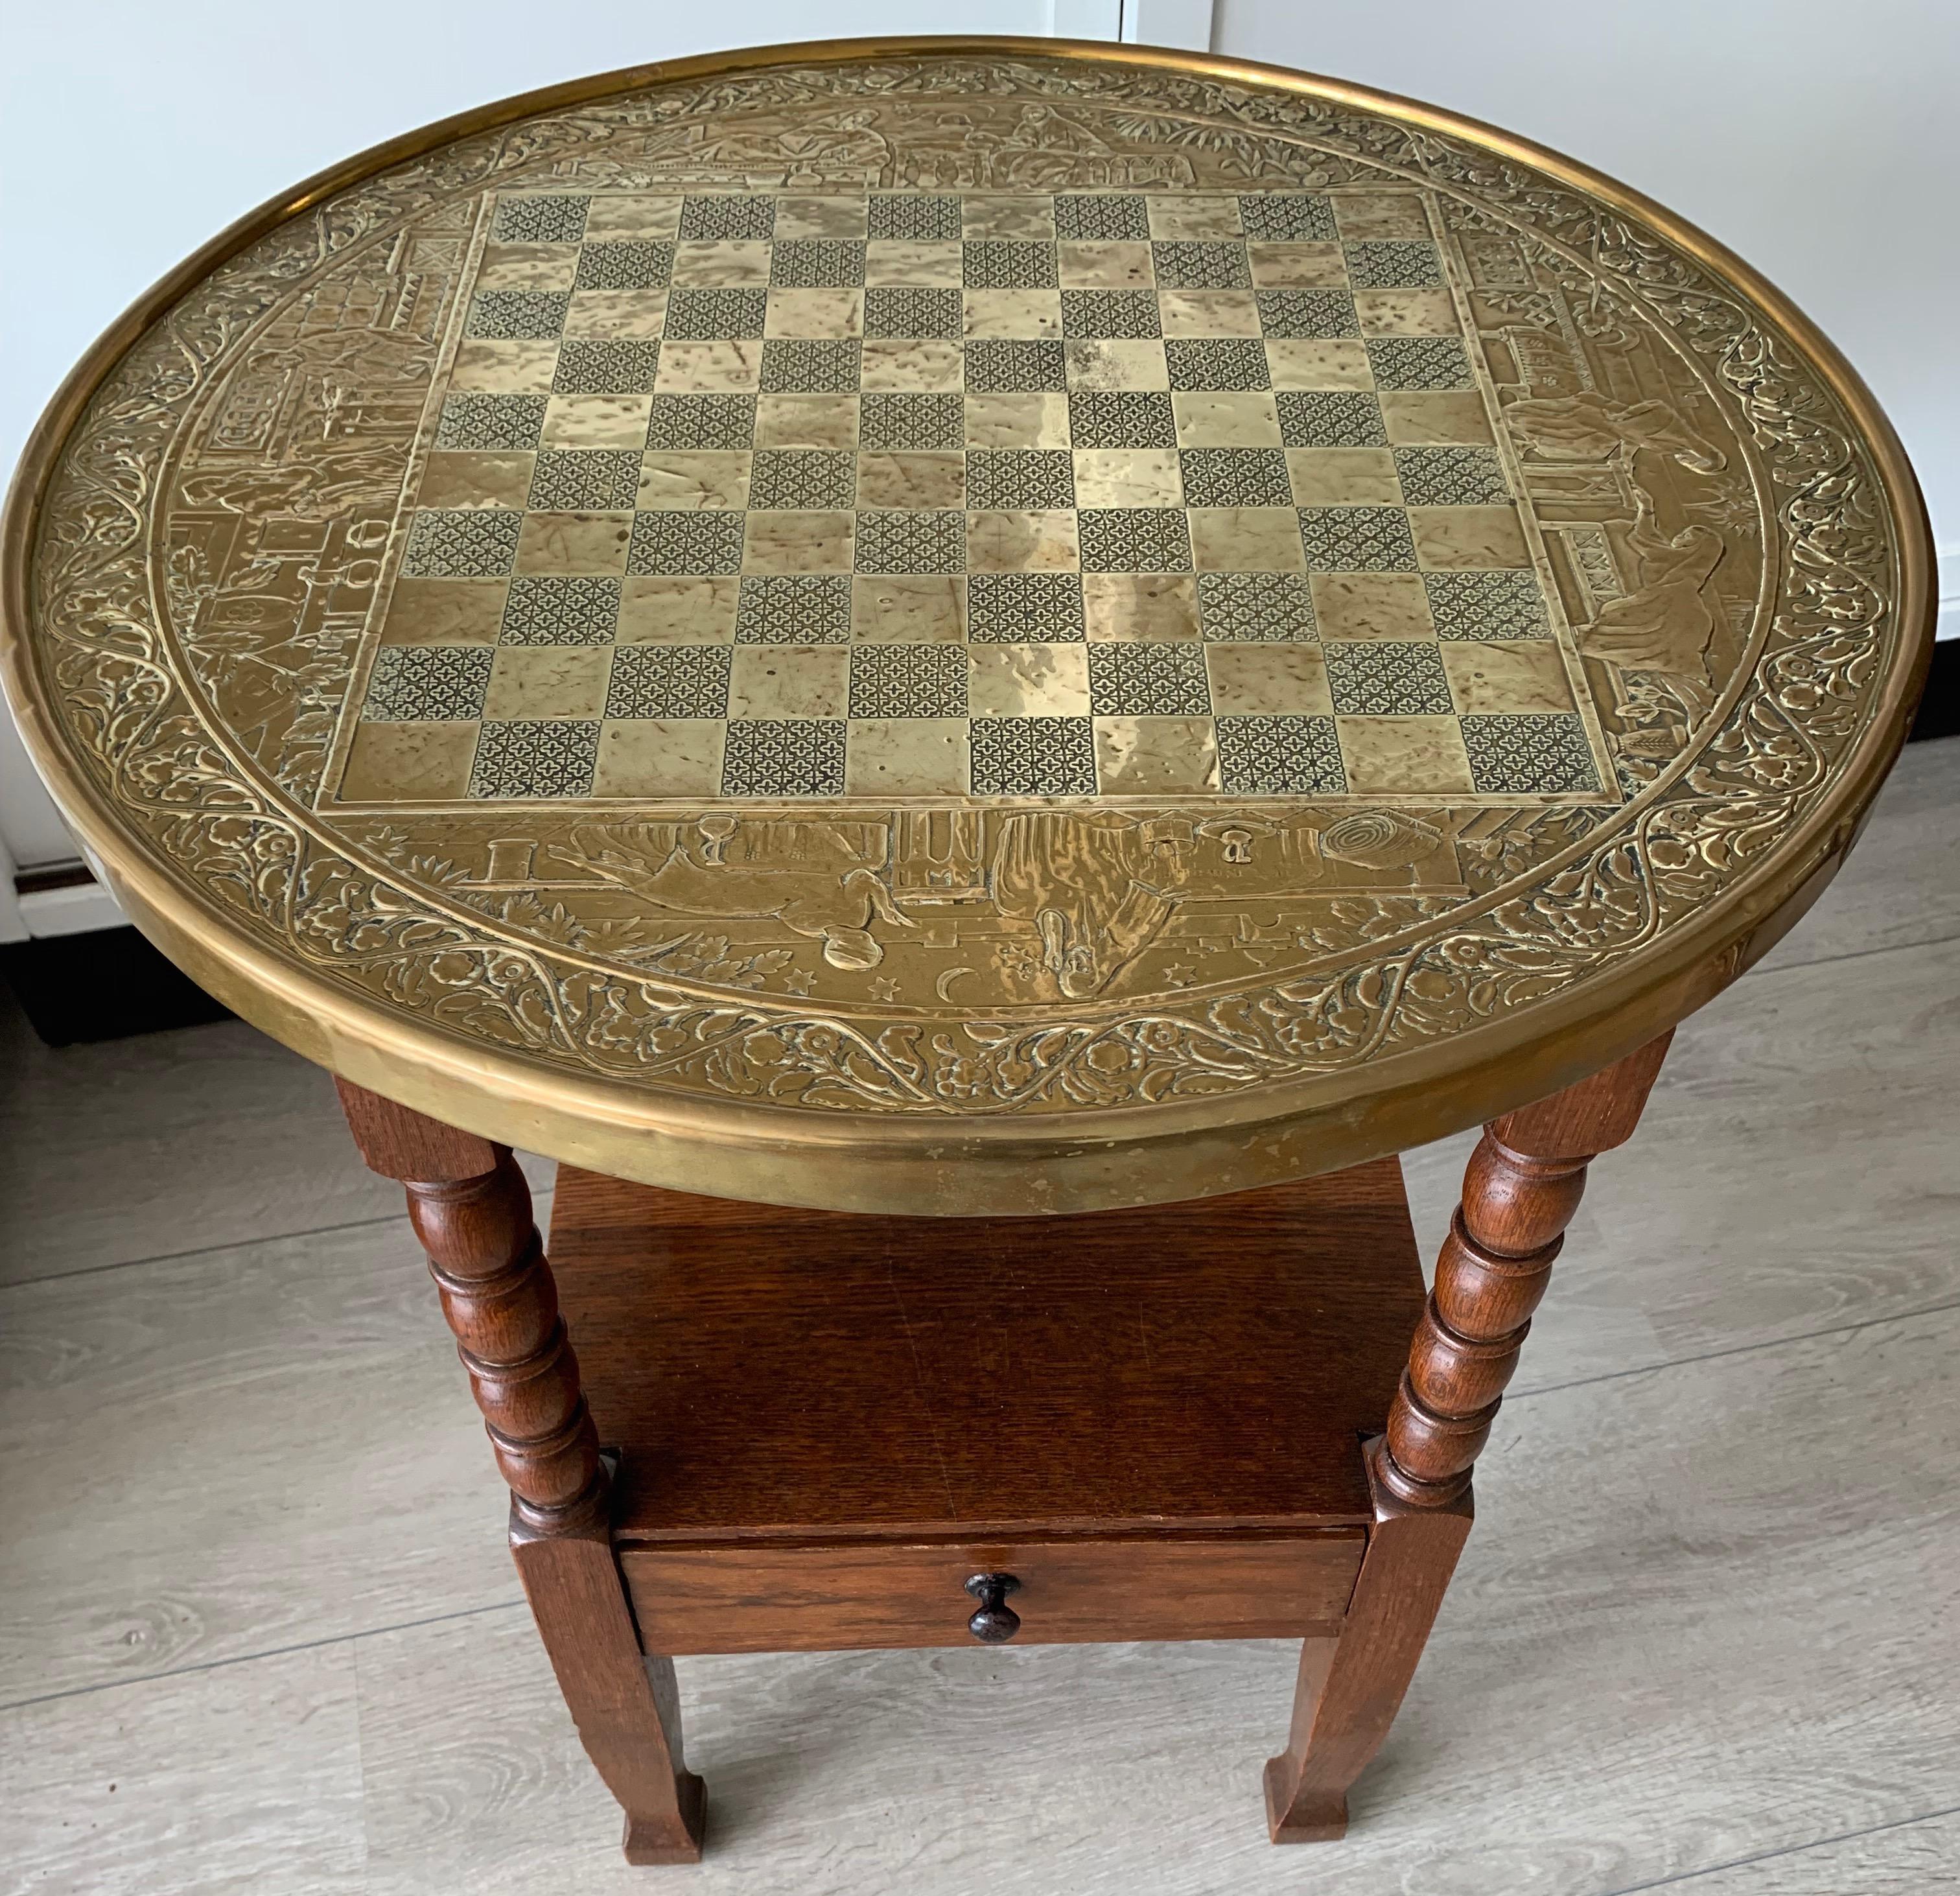 Early 1900s Dutch Arts & Crafts Checkers/Draughts Table with Embossed Brass Top 3